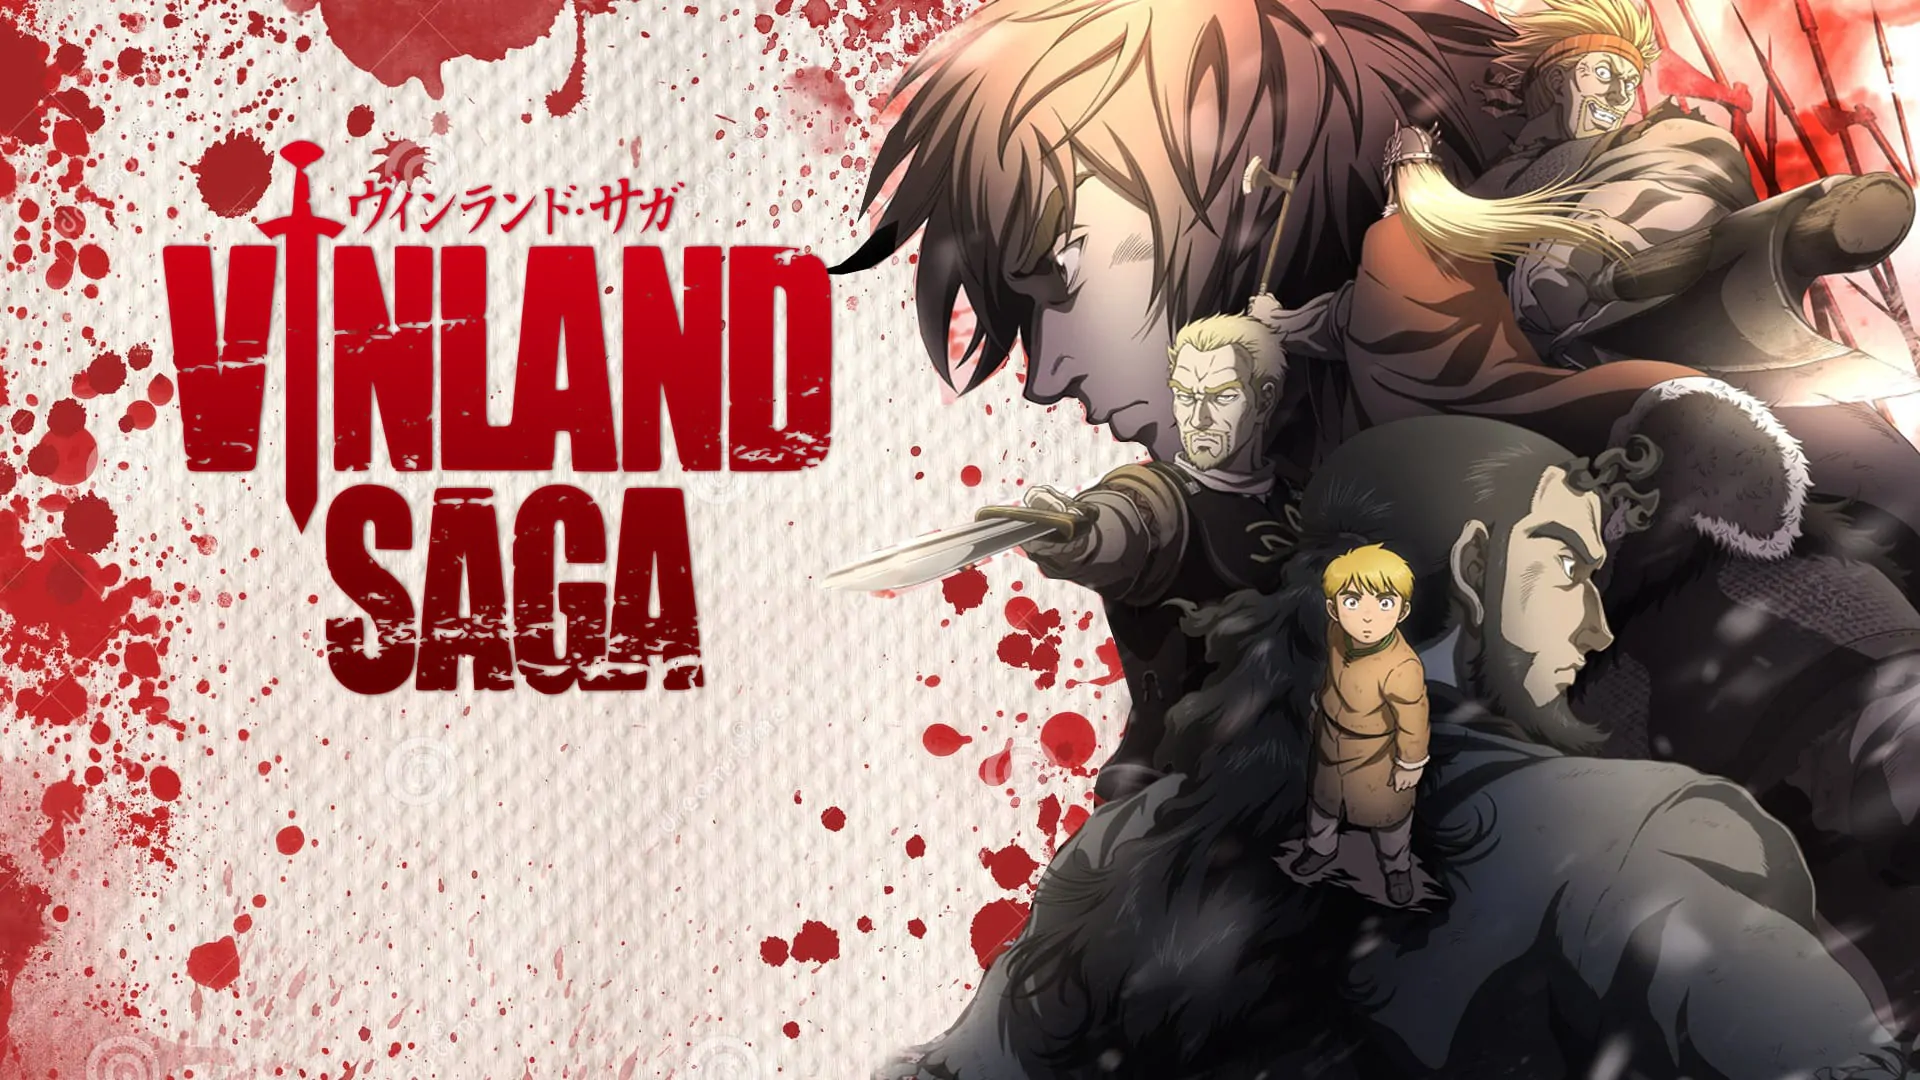 Vinland Saga Season 2 Release Date, Teaser Announcement, And Other Updates